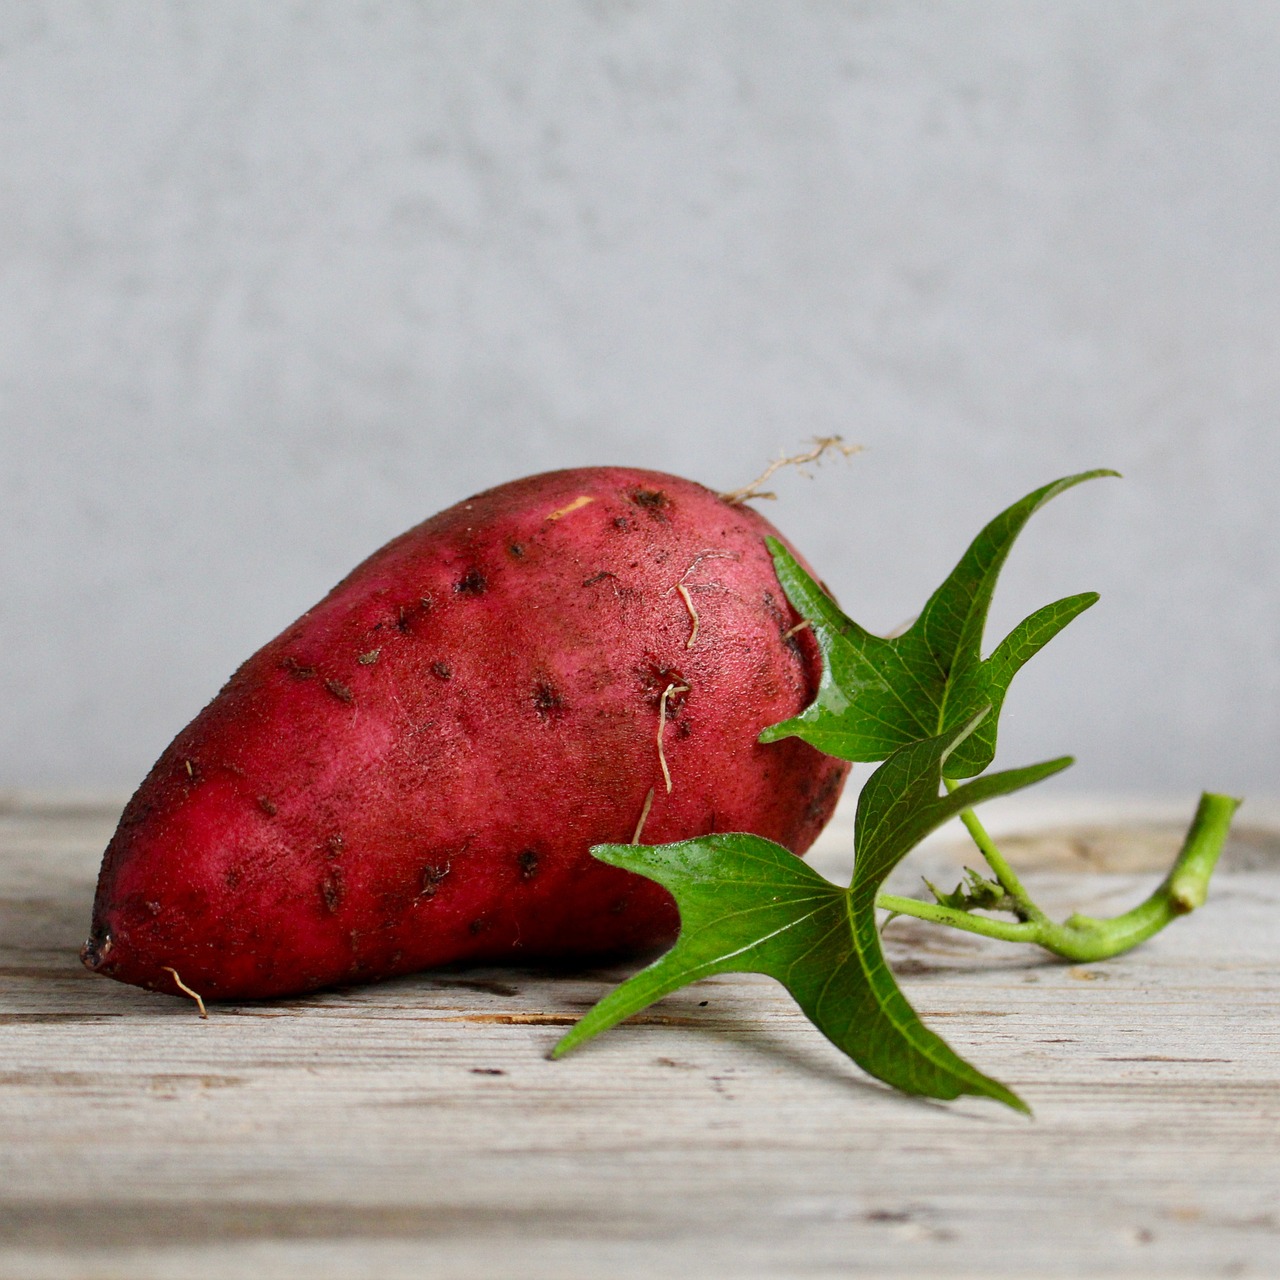 CAN YOU GROW SWEET POTATOES IN THE UK